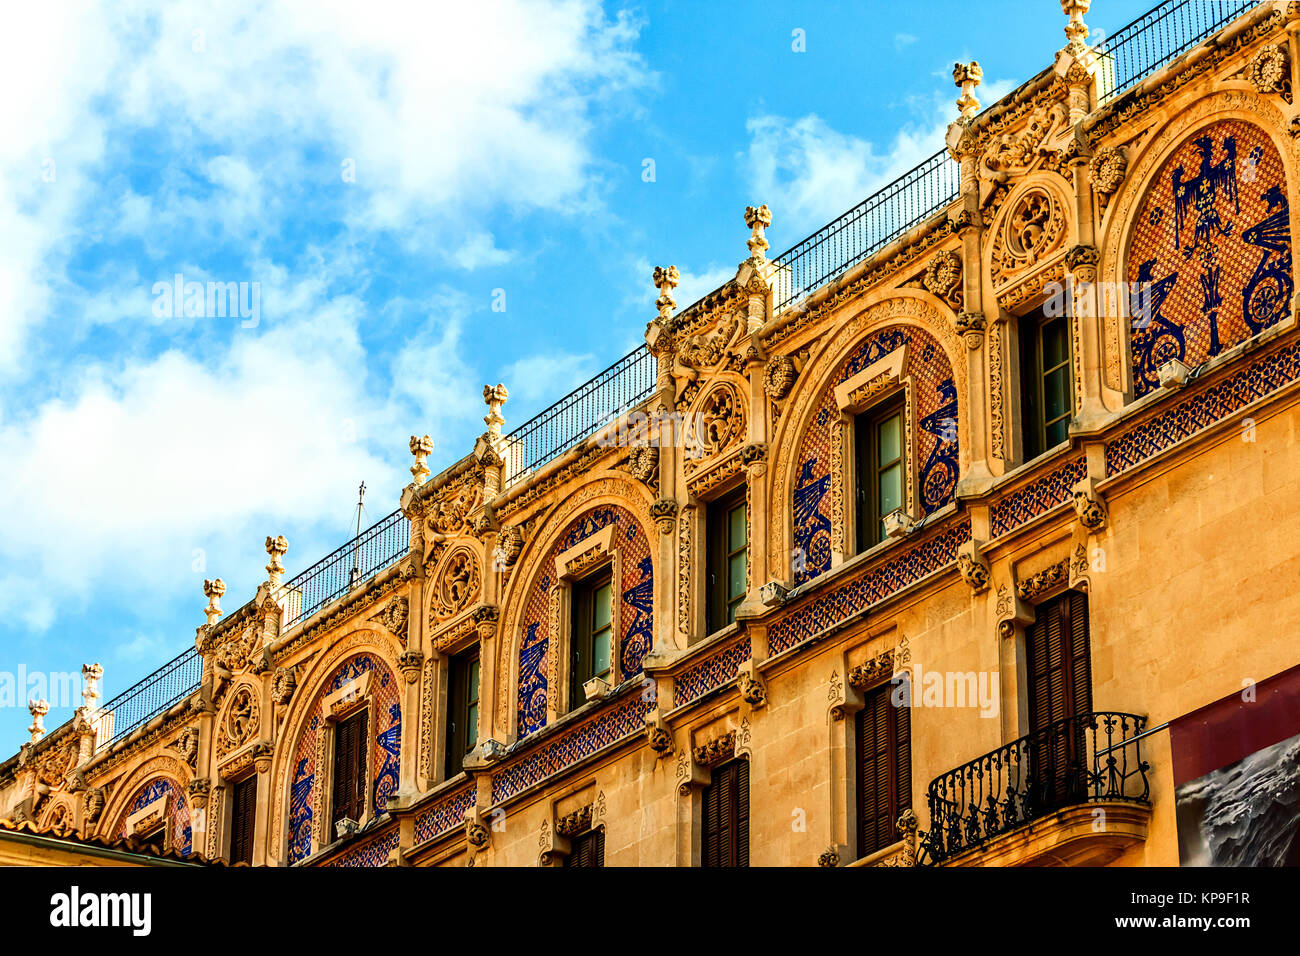 artfully allowed house frontage at the square in palma de mallorca Stock Photo